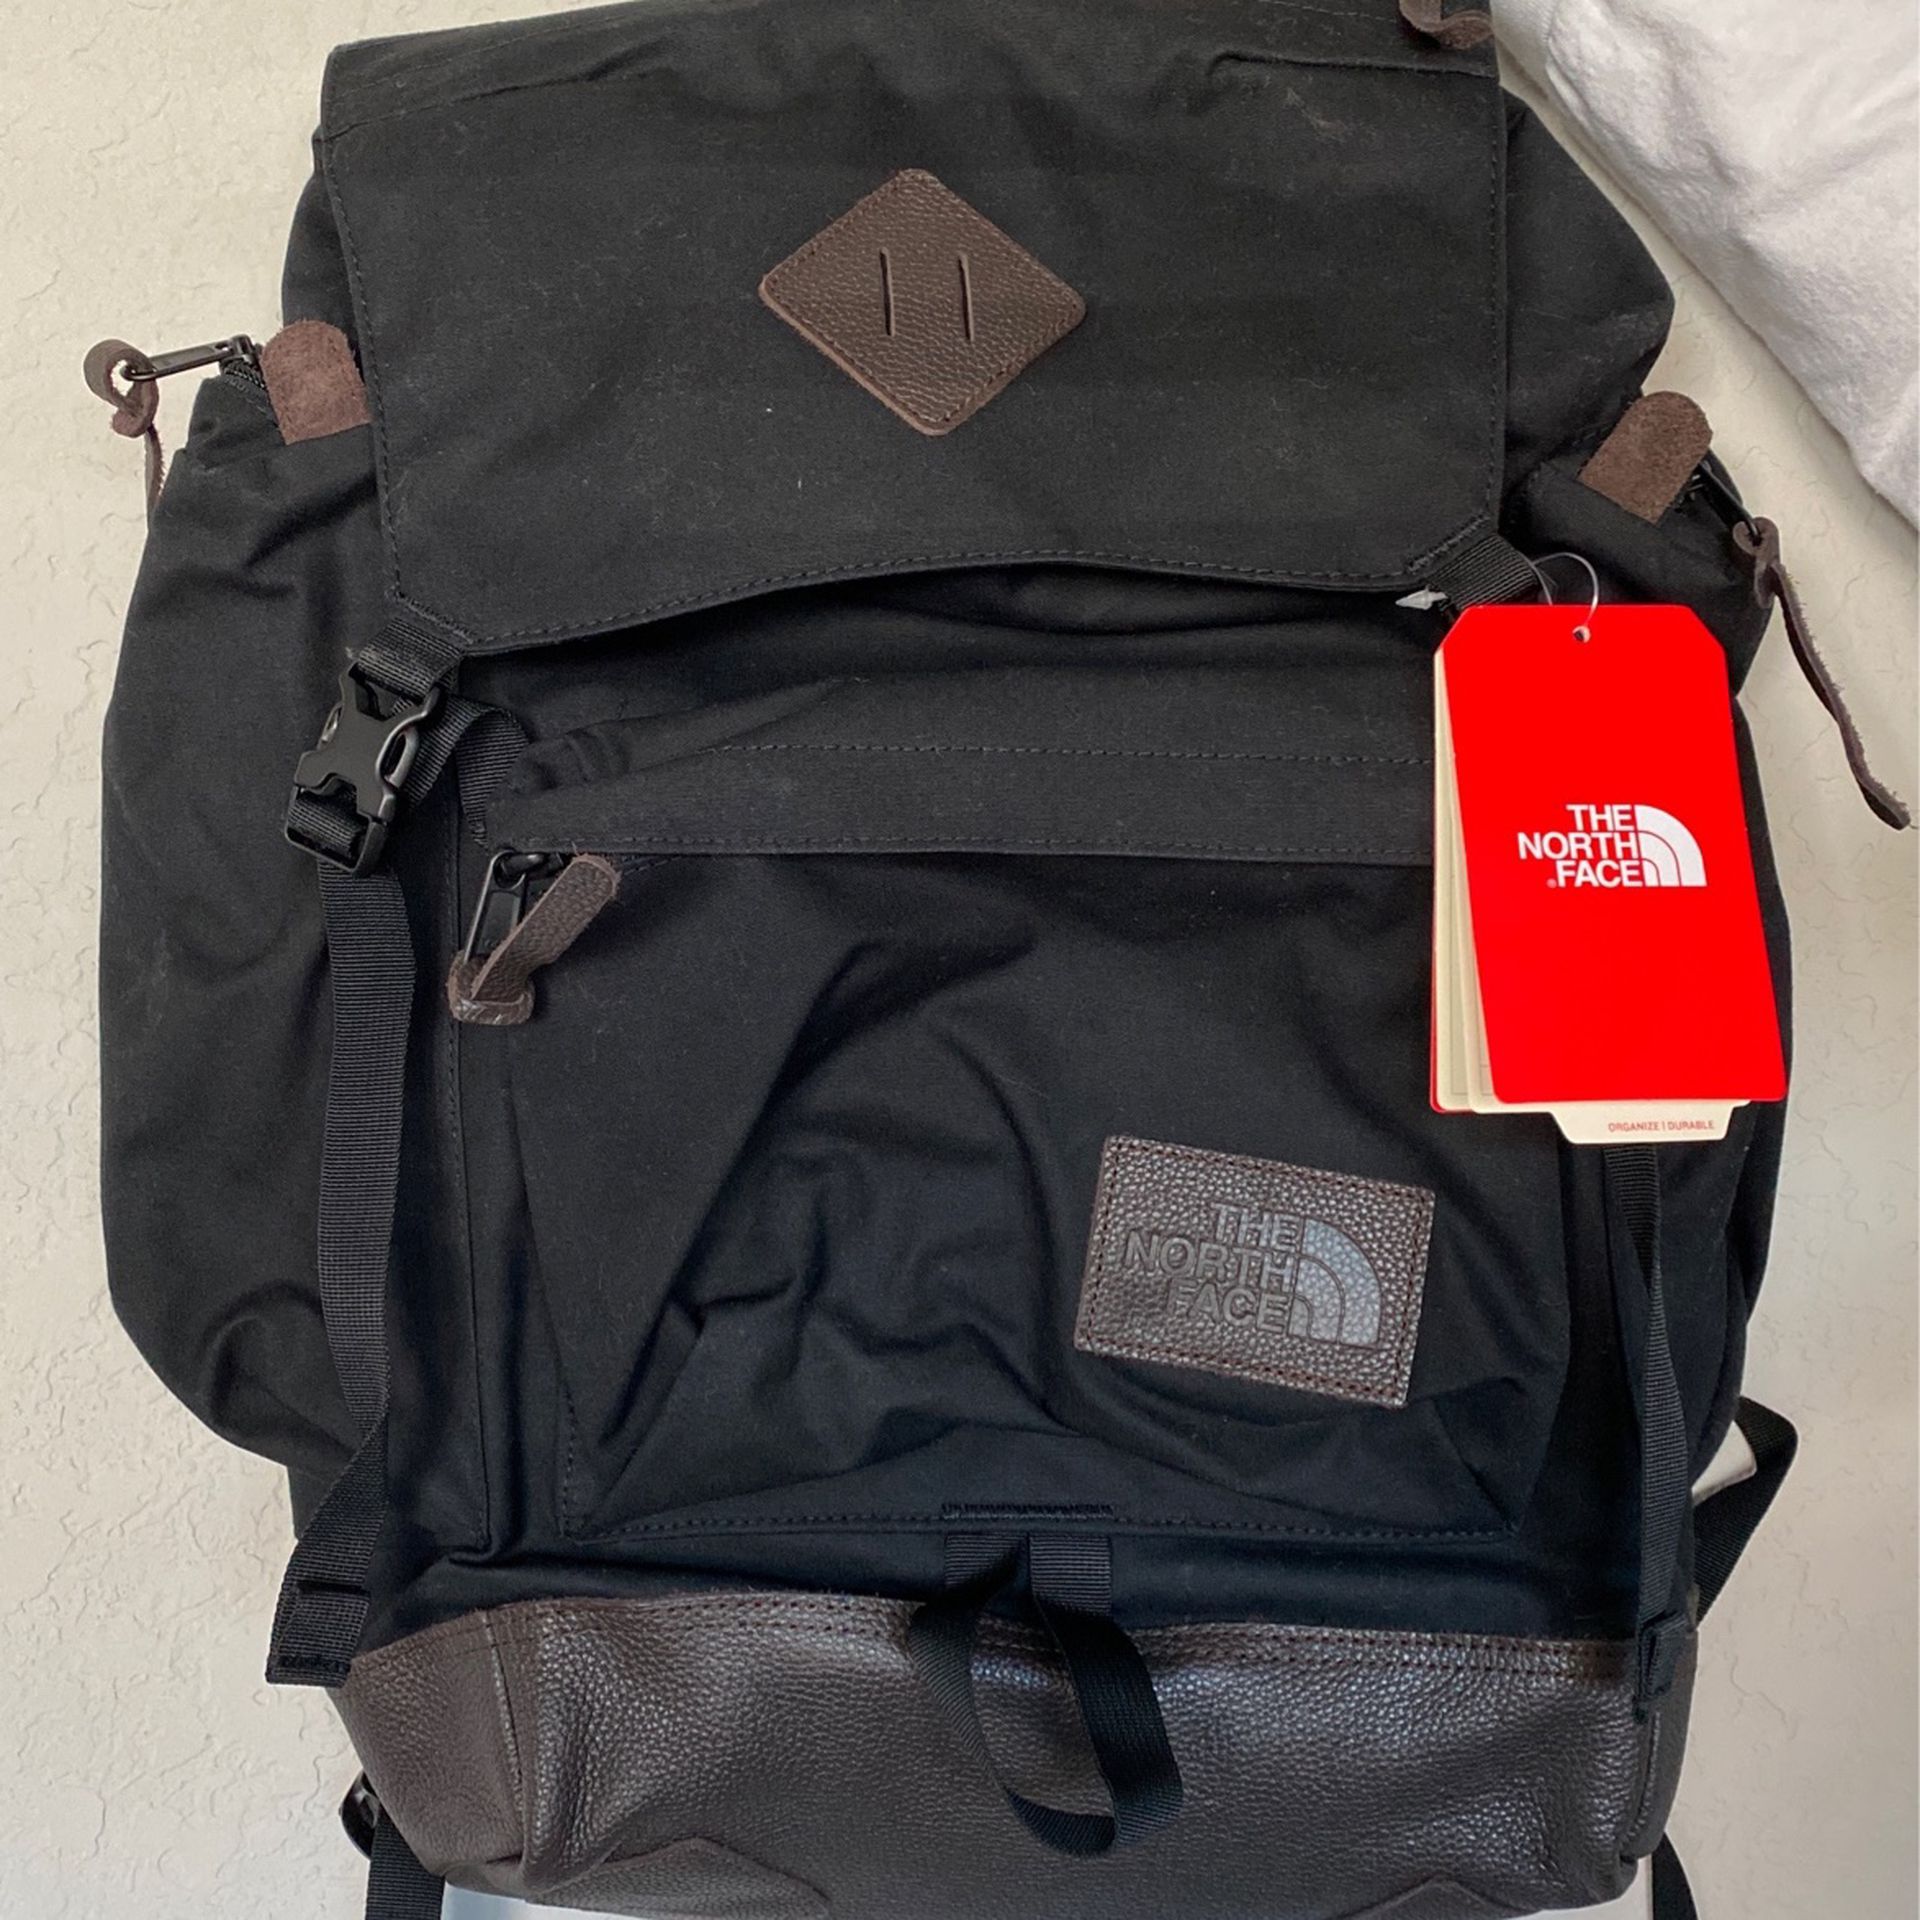 BRAND NEW NORTH FACE BACKPACK